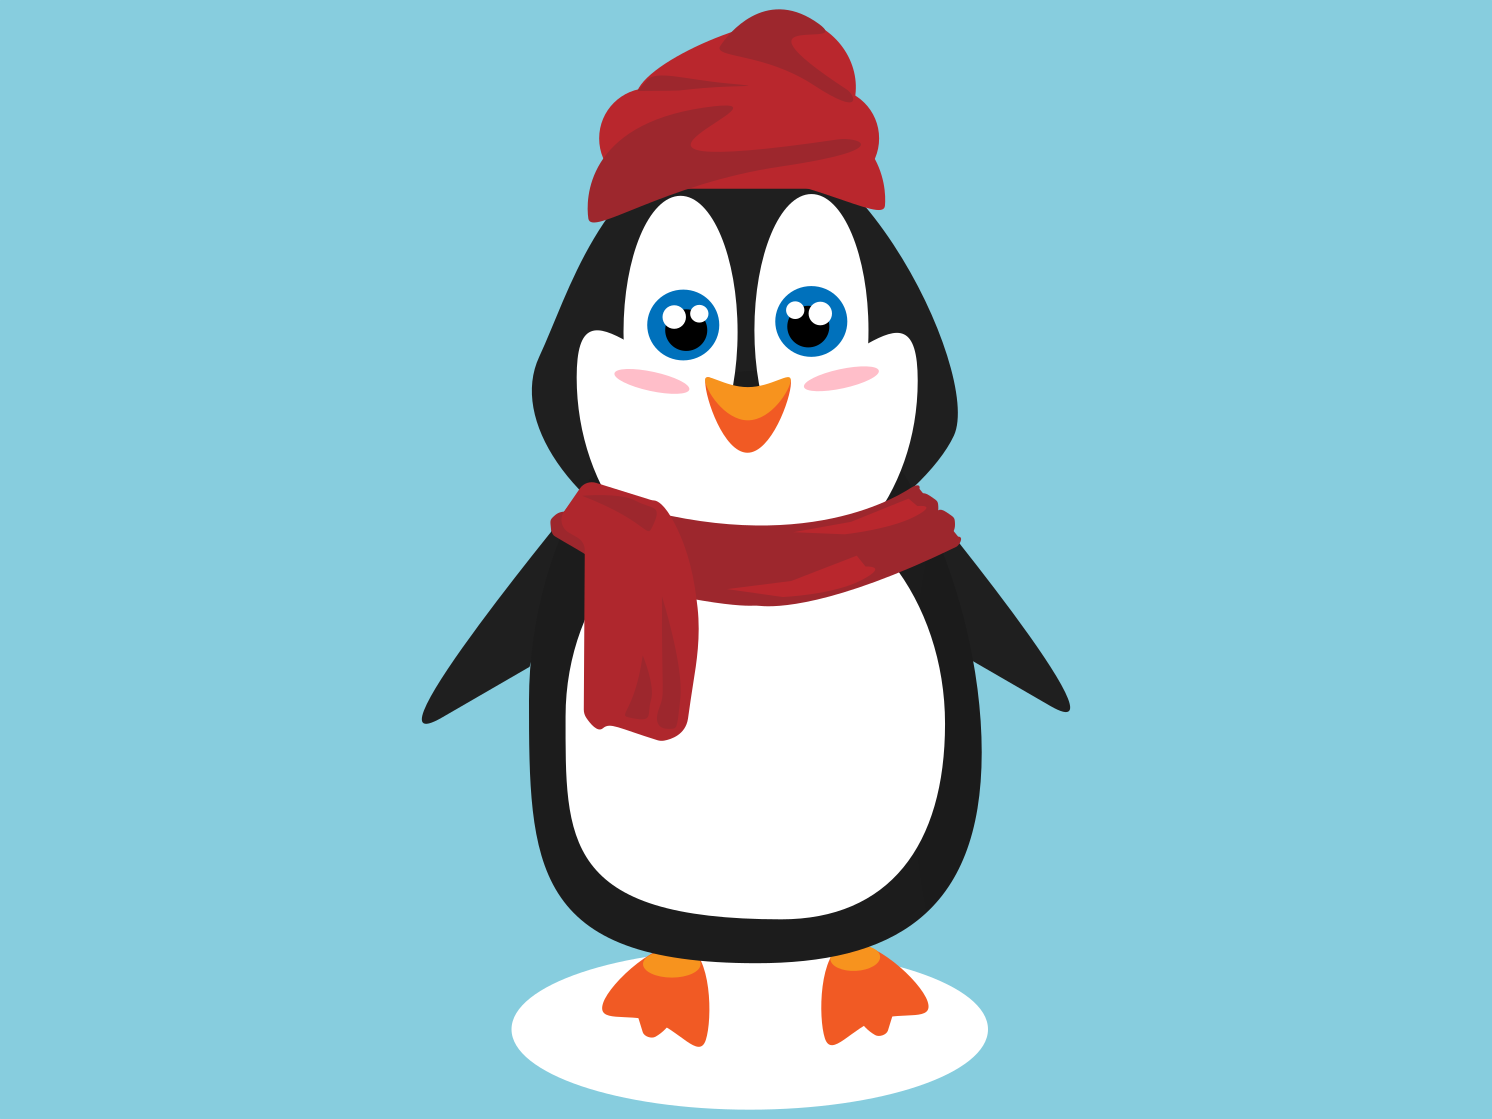 Penguin with a hat and a scarf